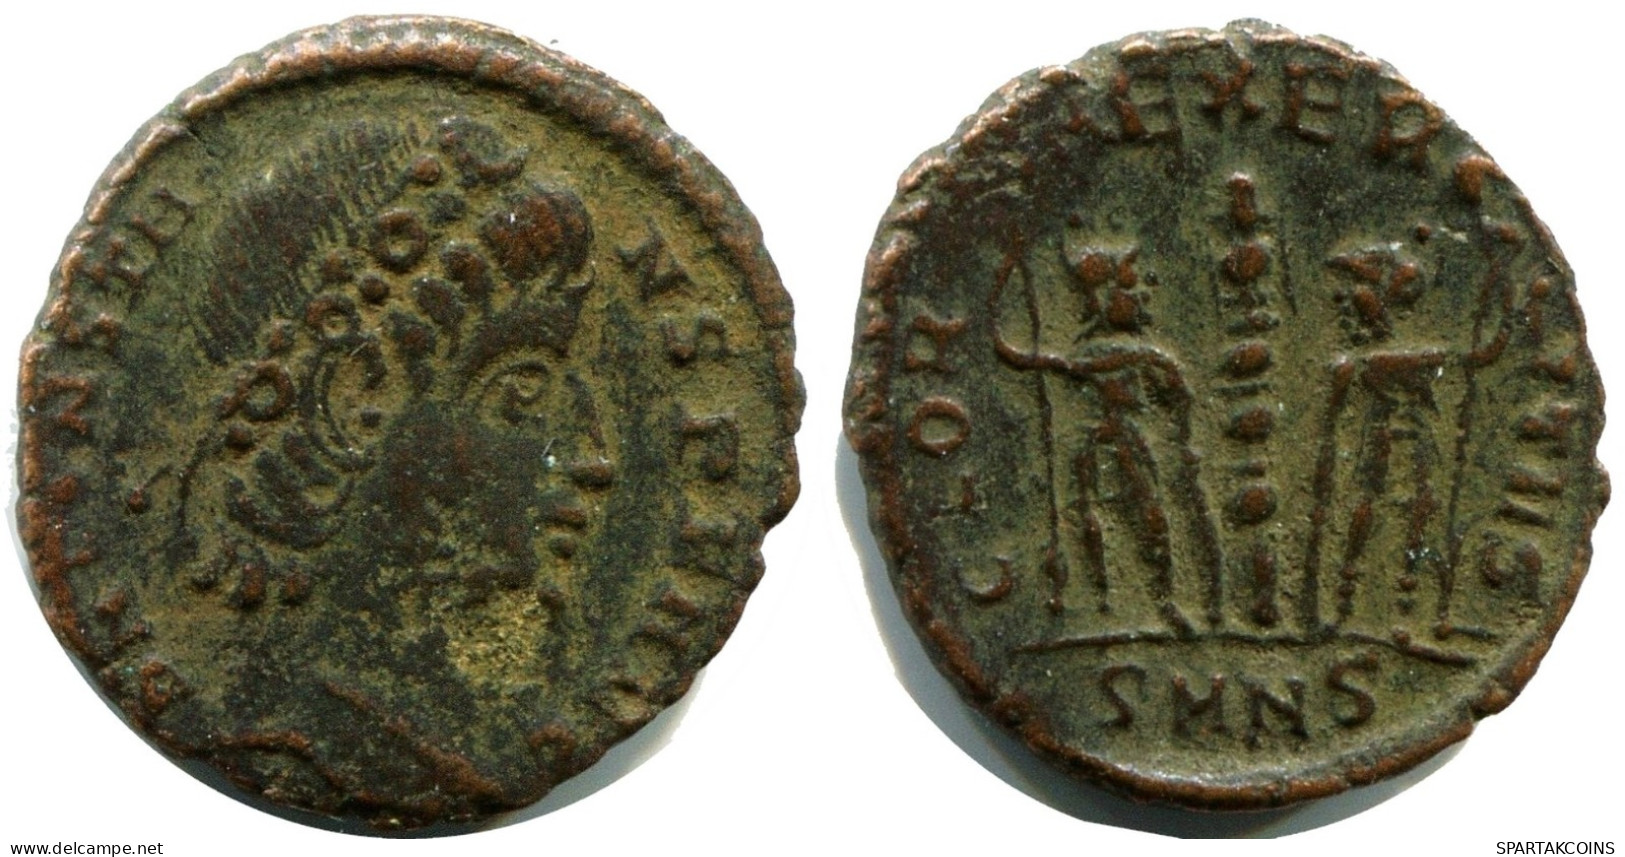 CONSTANS MINTED IN NICOMEDIA FROM THE ROYAL ONTARIO MUSEUM #ANC11775.14.E.A - El Imperio Christiano (307 / 363)